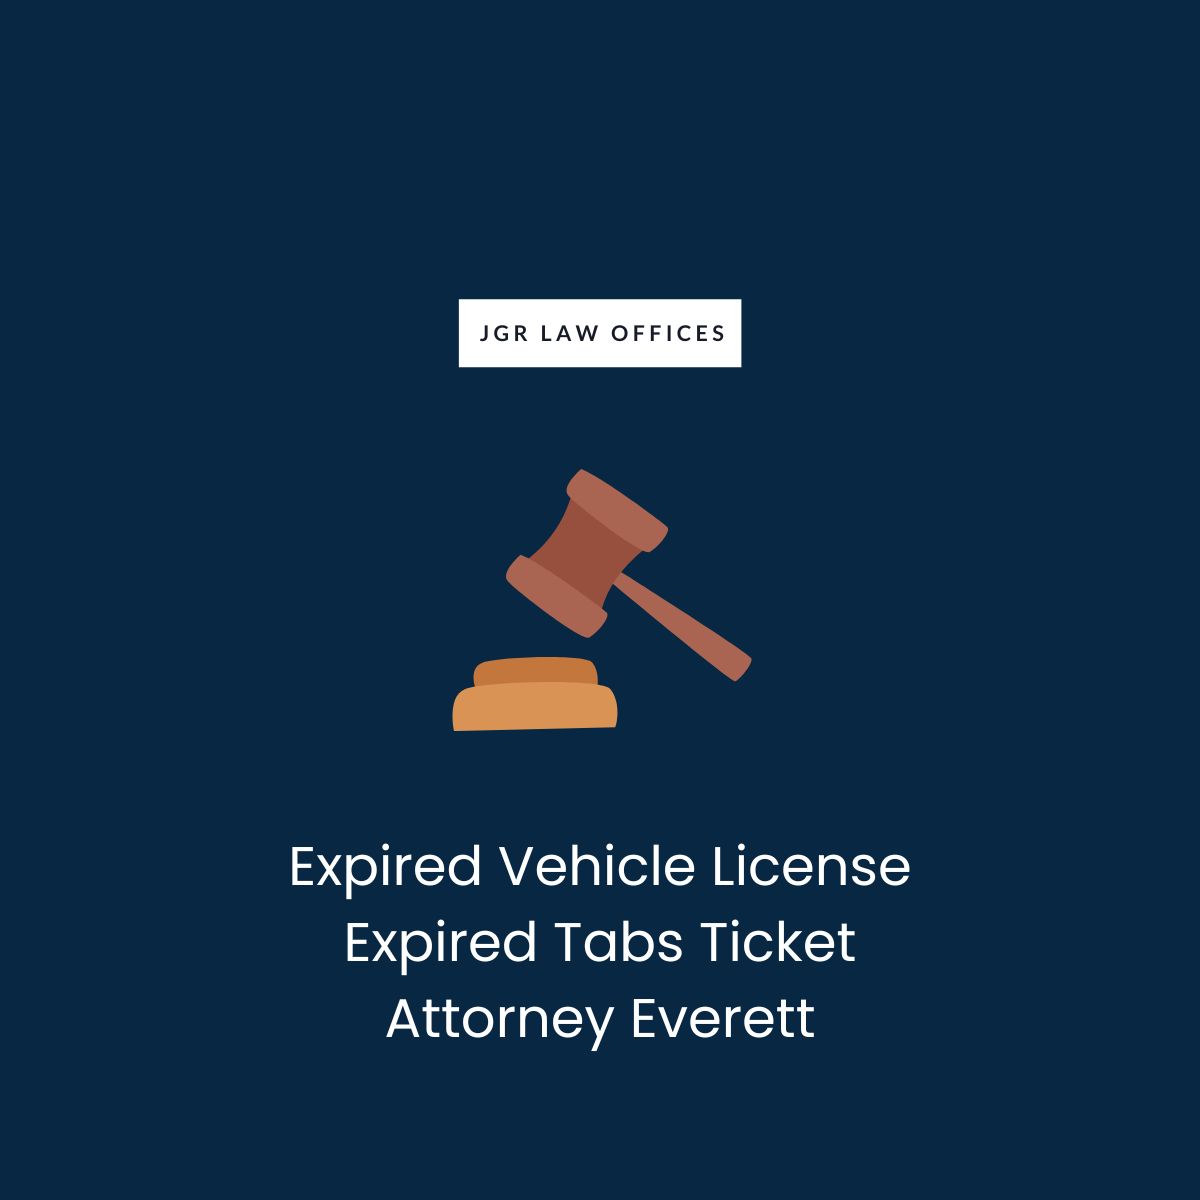 Expired Vehicle License Expired Tabs Ticket Attorney Everett